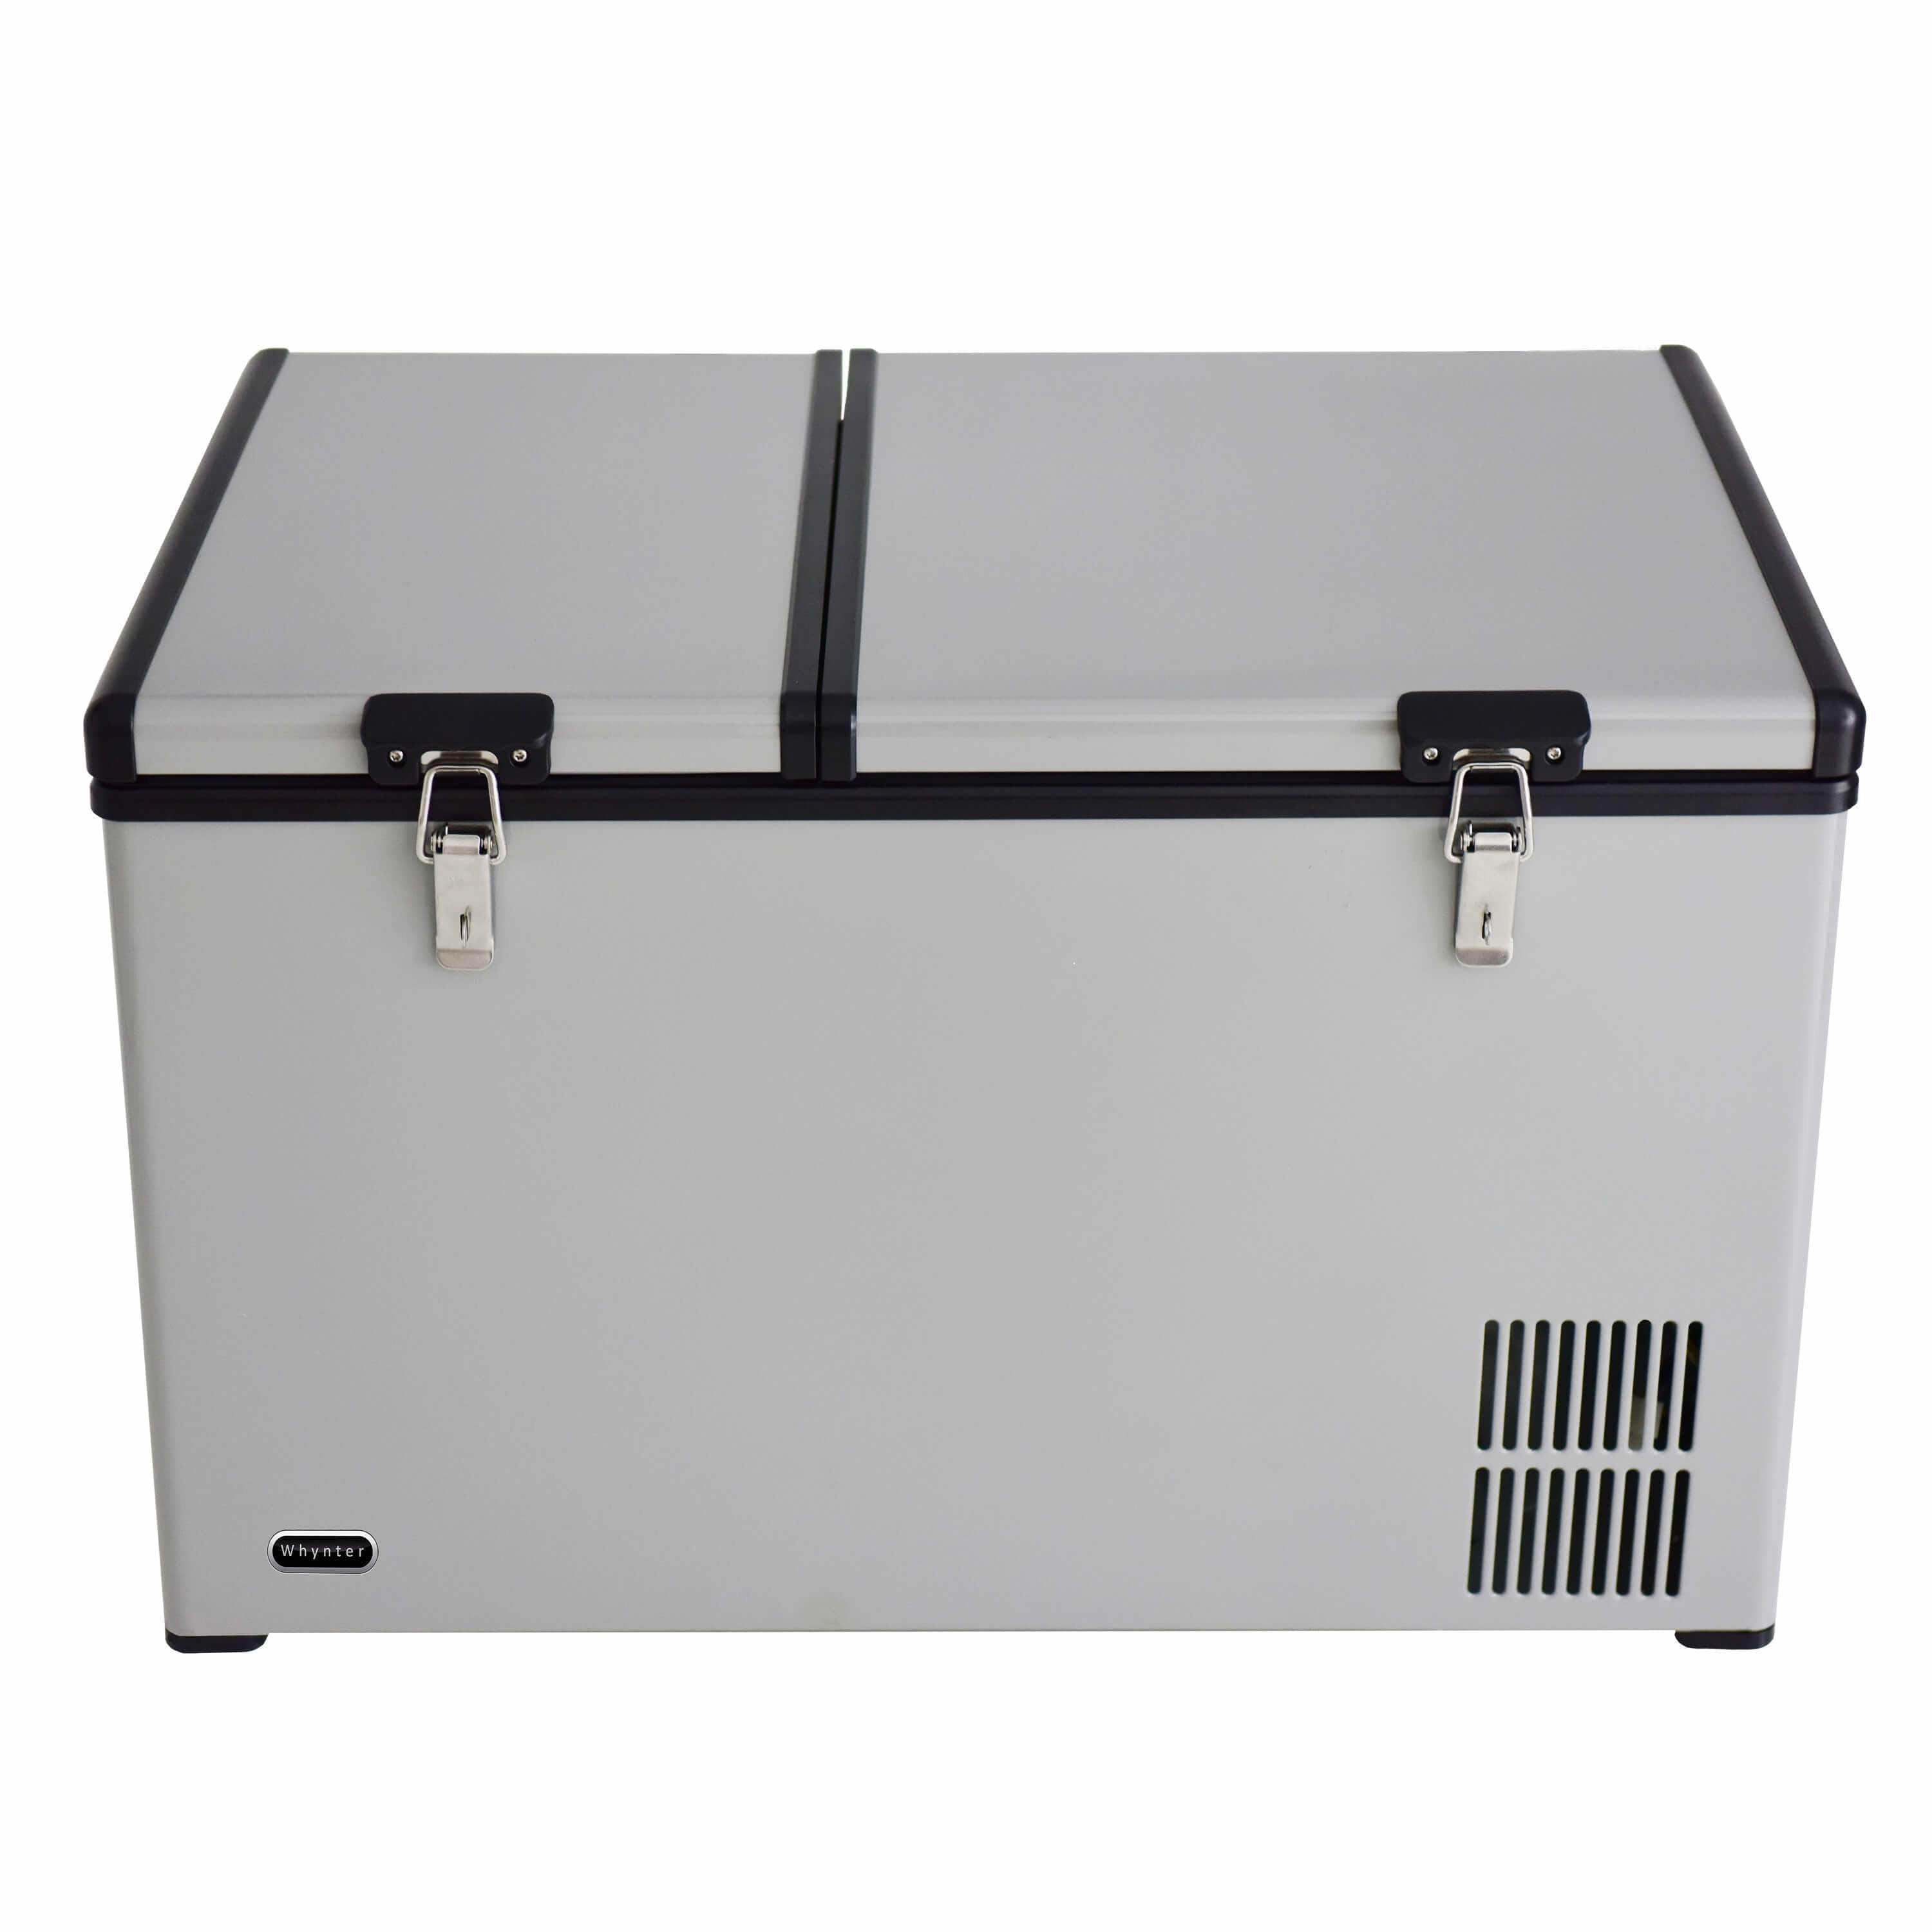 Whynter 90 Quart Dual Zone Portable Fridge/ Freezer with 12v Option and Wheels FM-901DZ Wine Coolers Empire